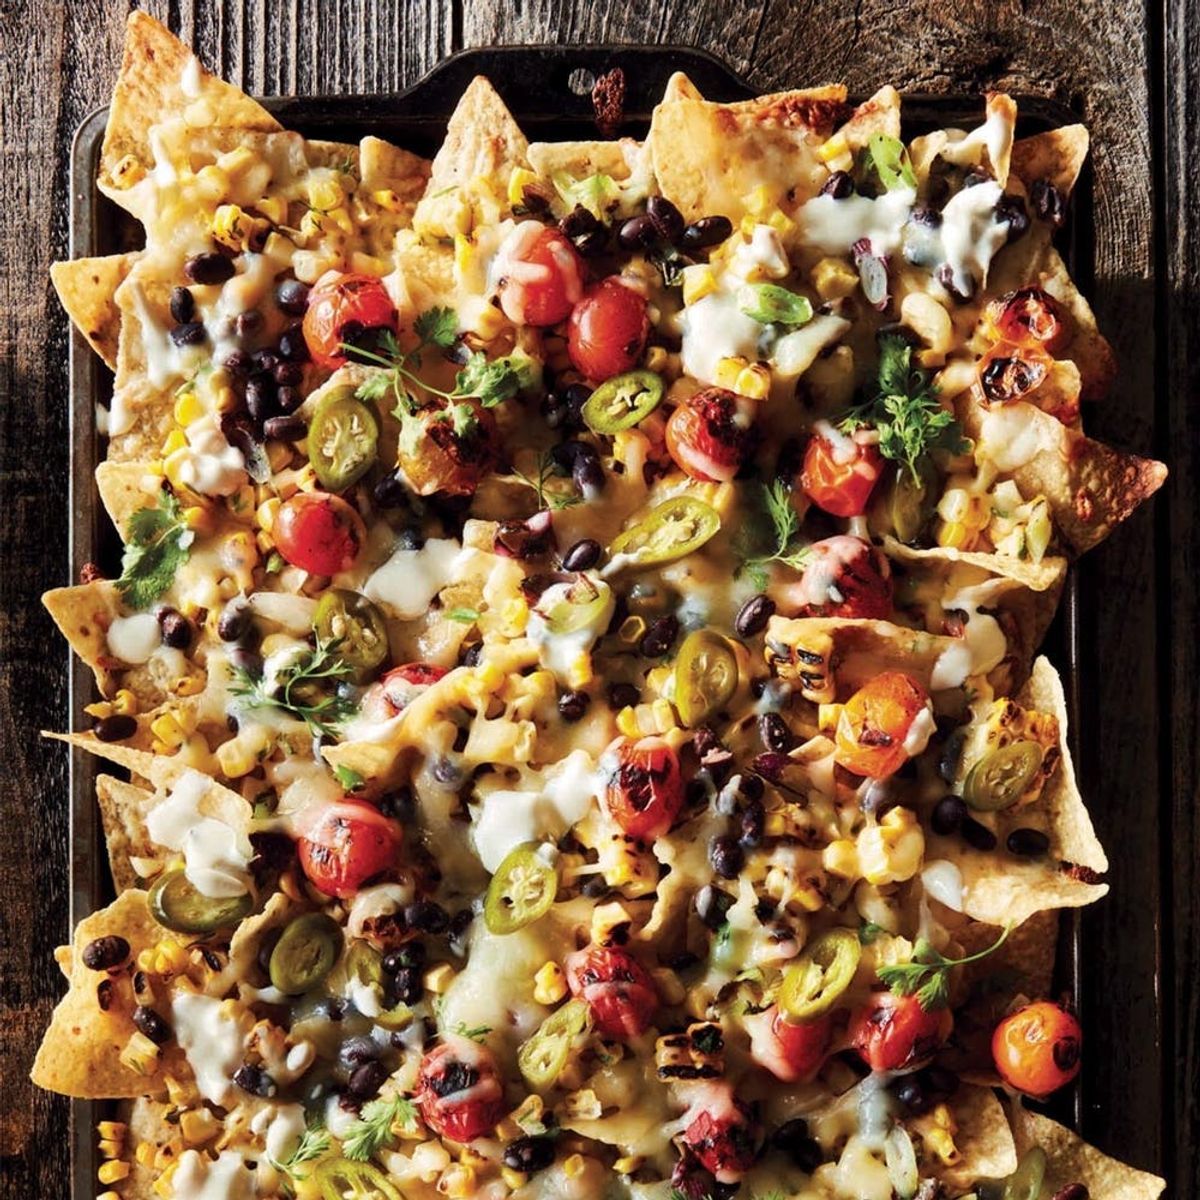 Fire Up the BBQ RN to Make Grilled Corn Nachos